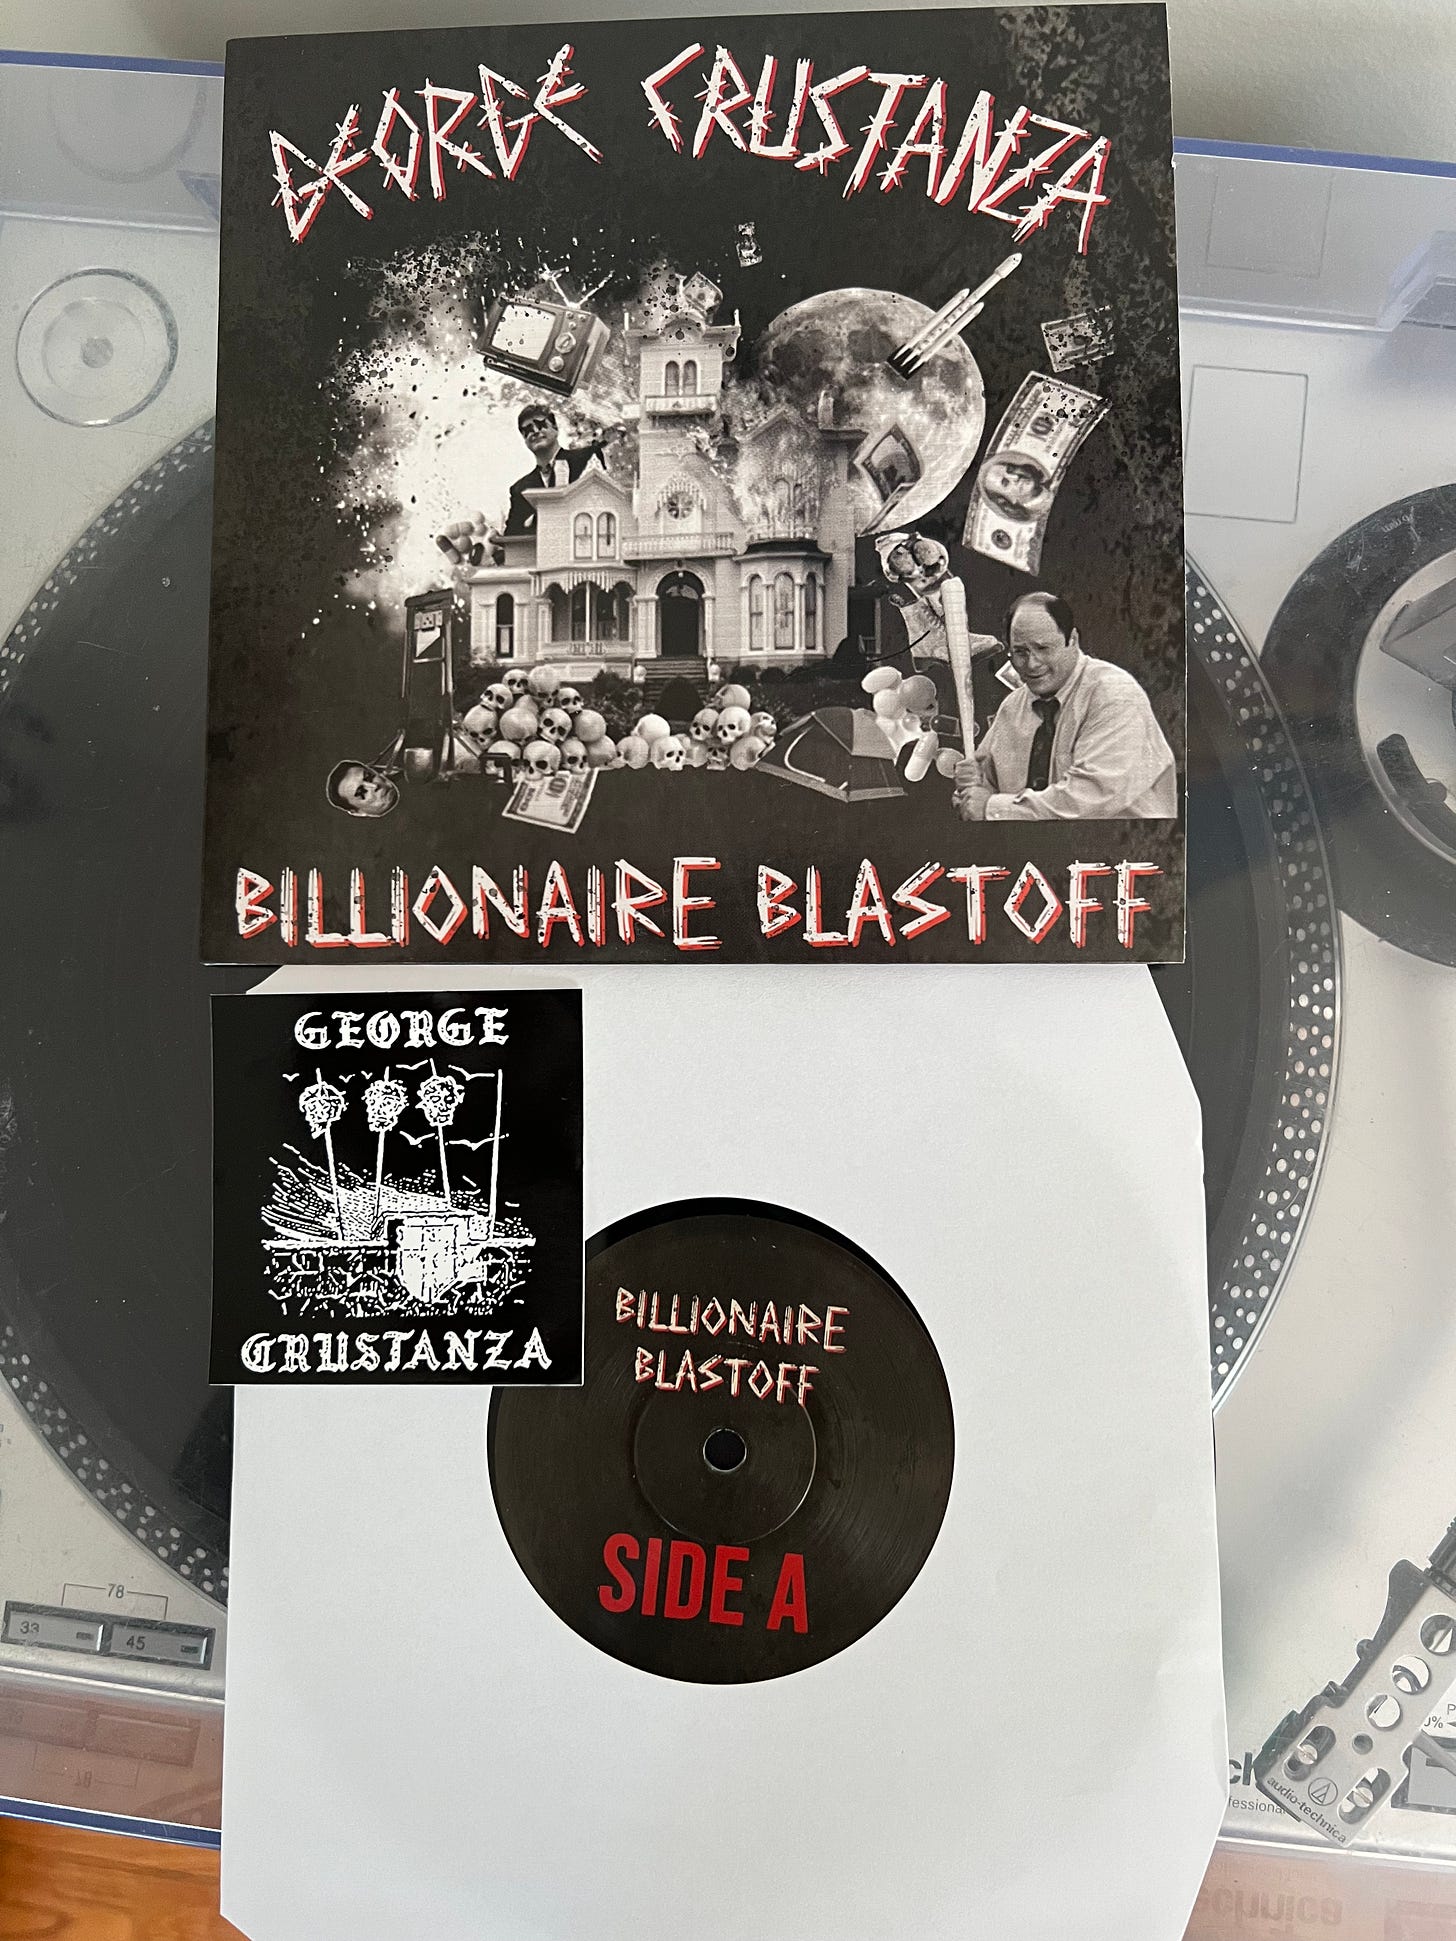 a record by George Crustanza, called Billionaire blastoff, and a sticker featuring heads on pikes.